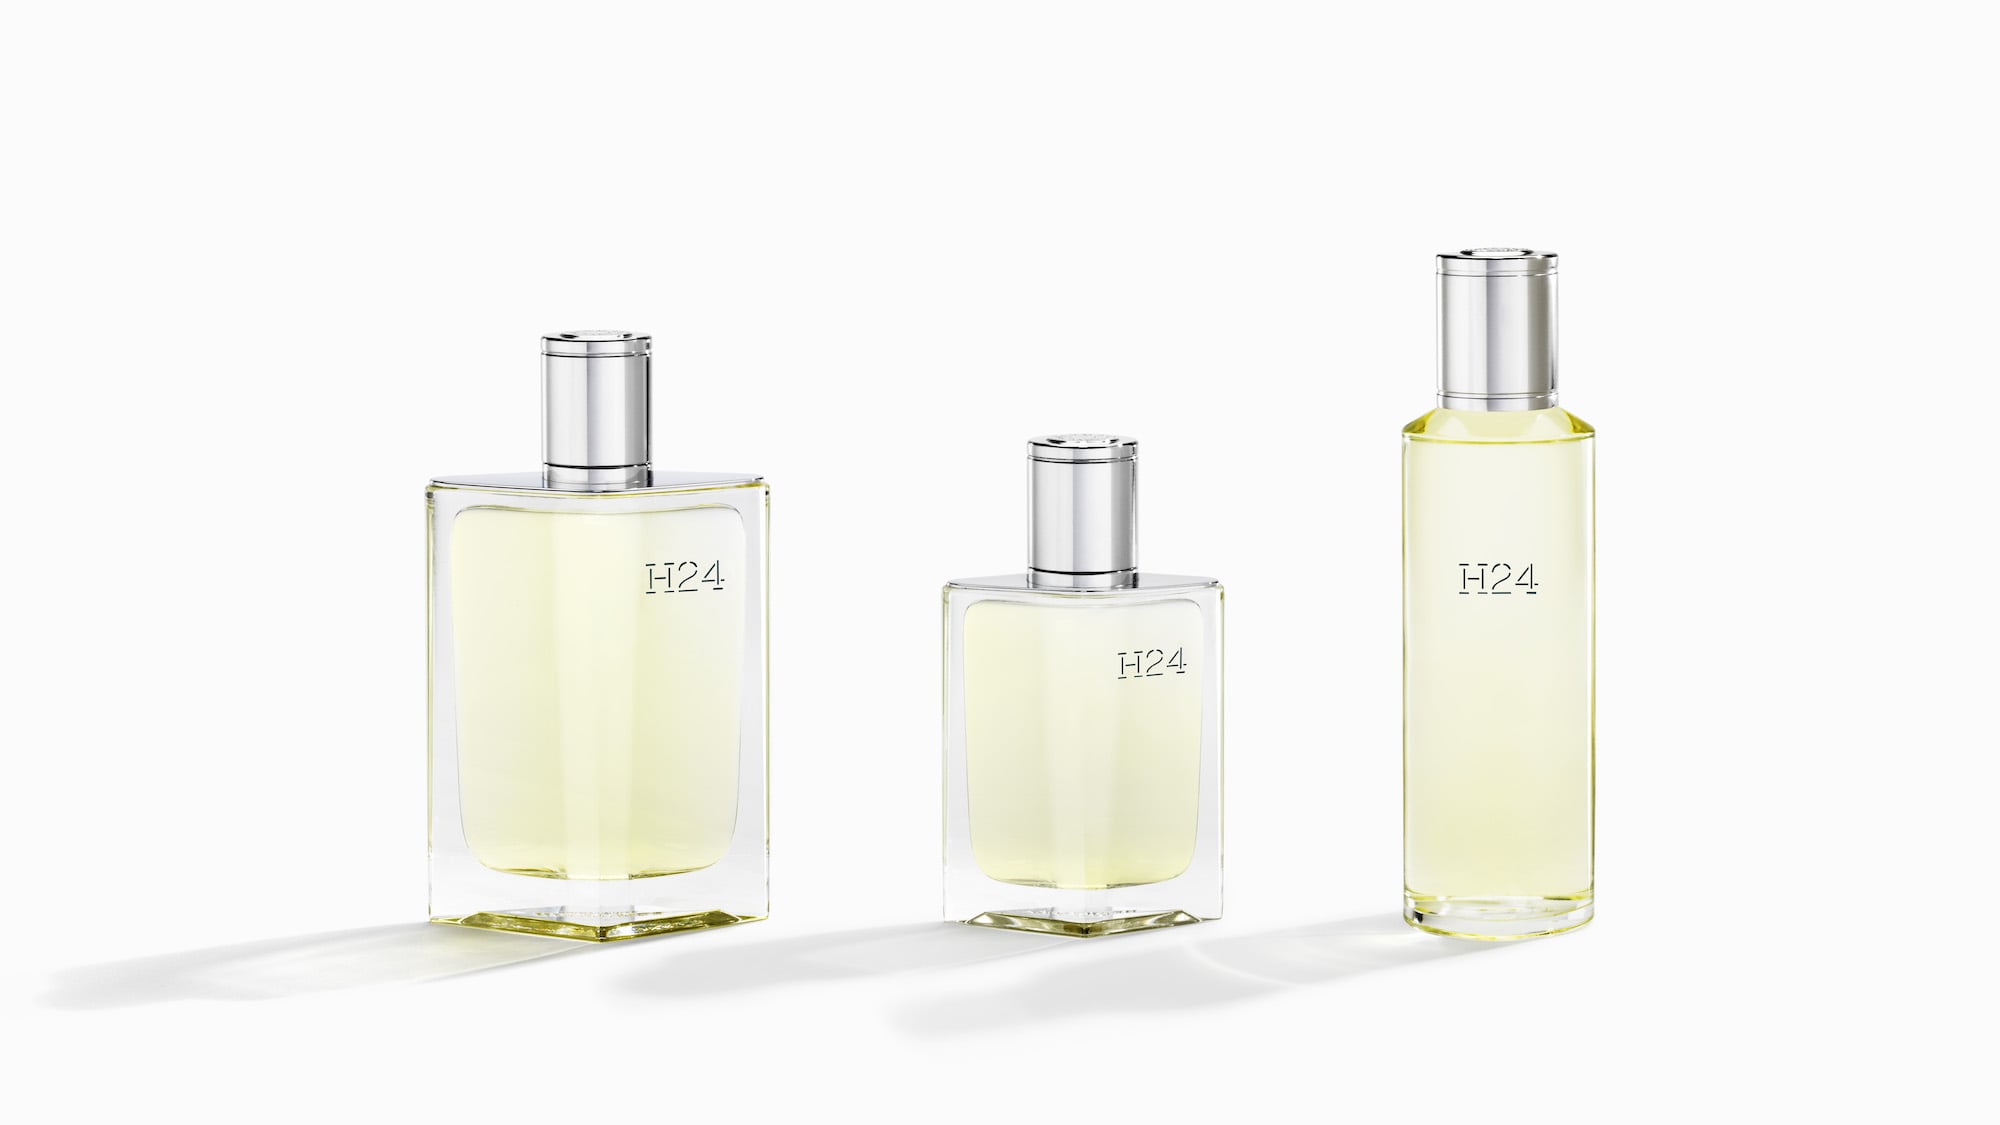 H24: Hermès' First Men's Fragrance in 15 Years is a Daring Blend 